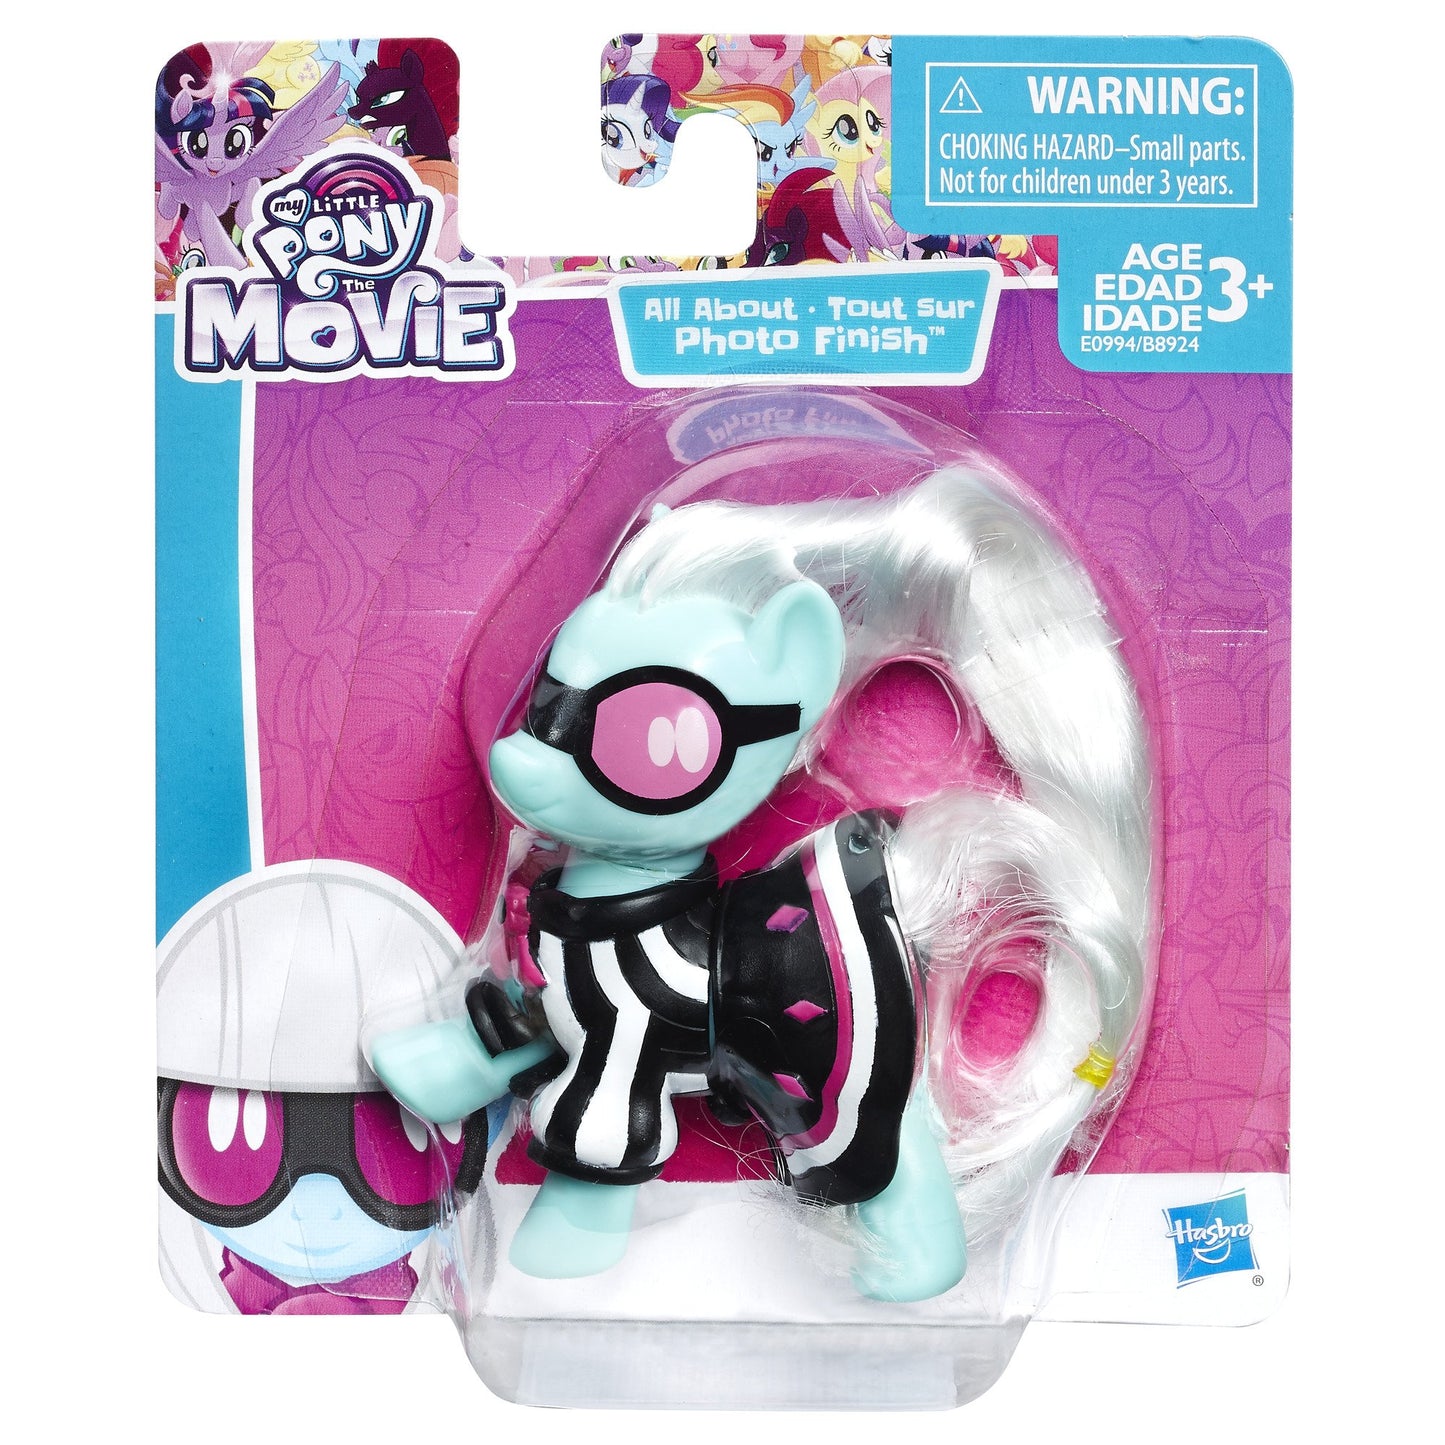 Hasbro Canada Corporation E0994AS00 My Little Pony: The Movie All About Photo Finish